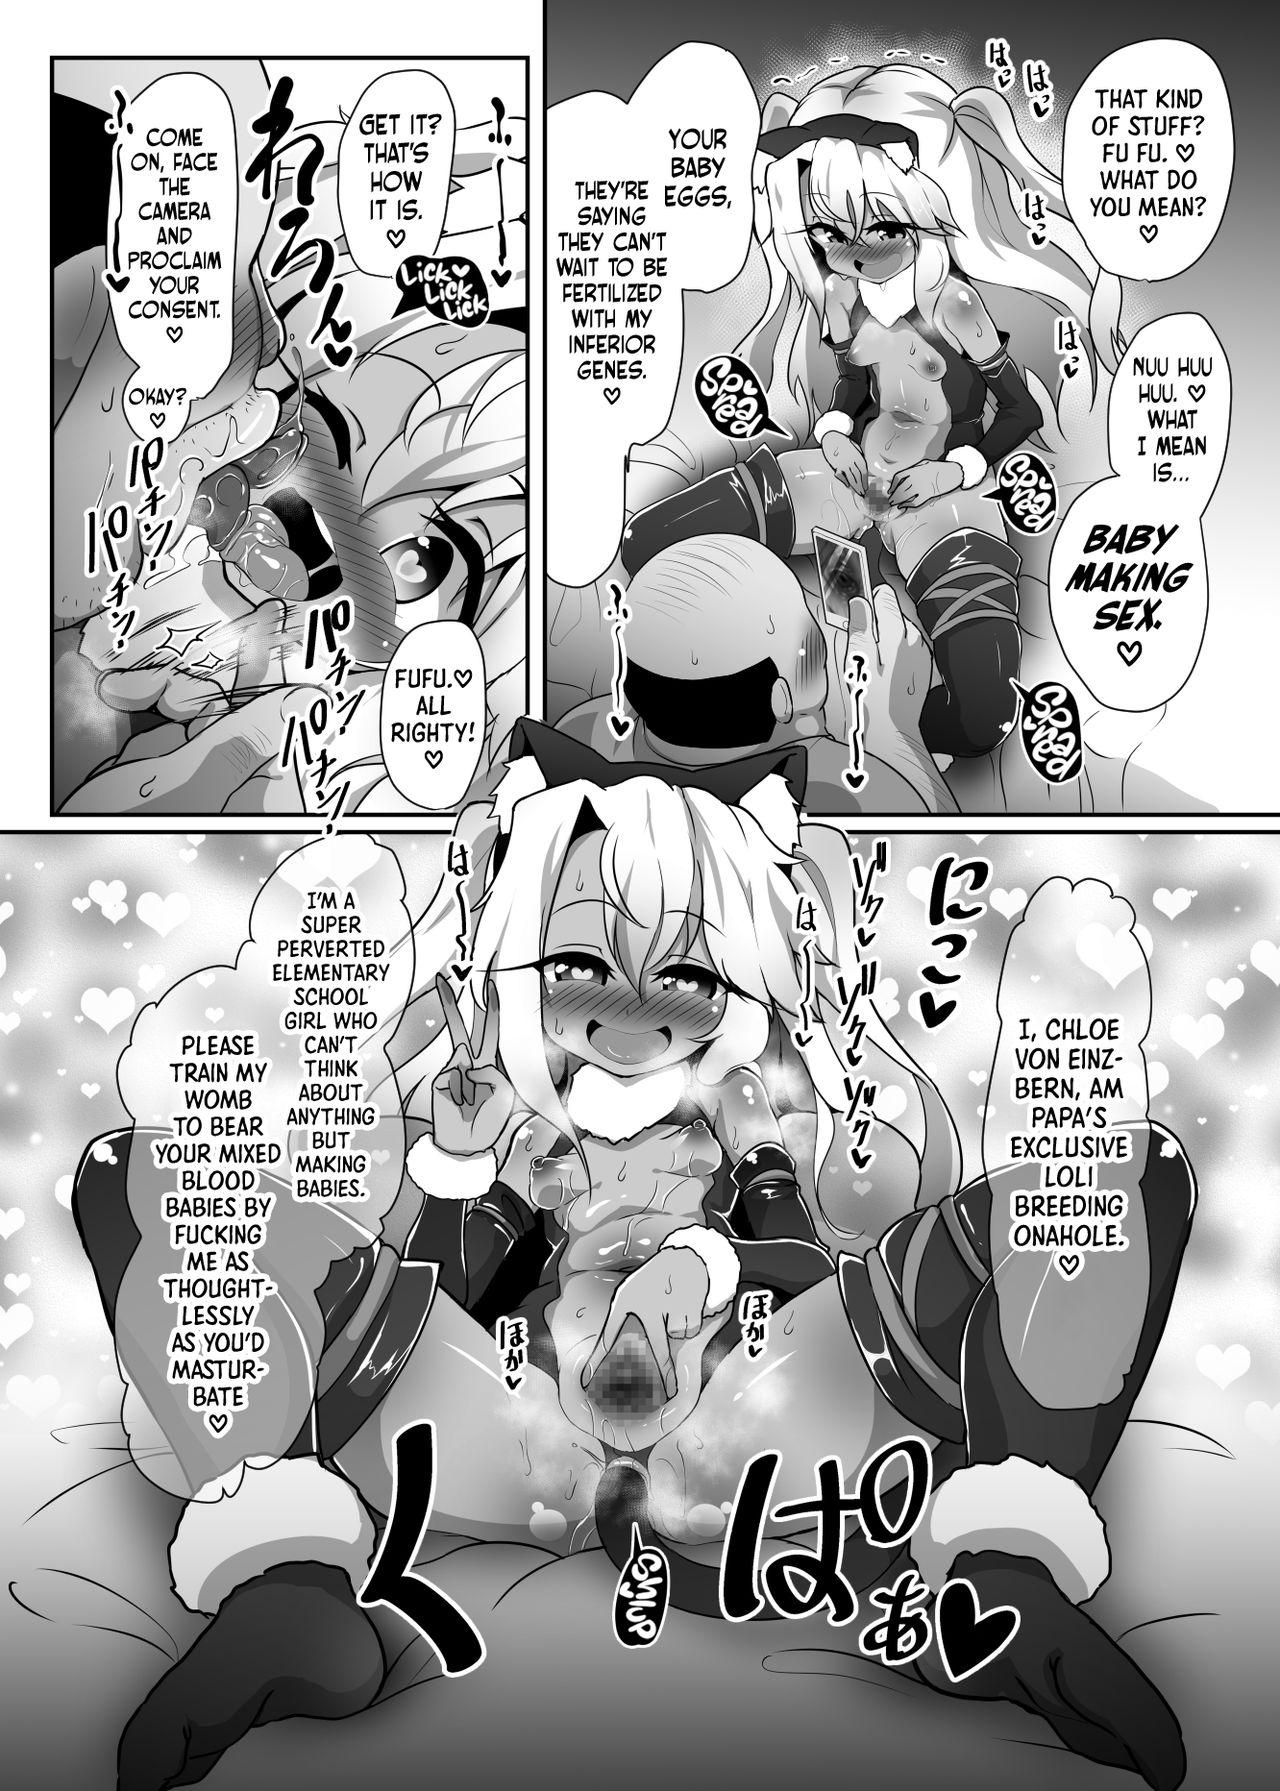 [Kotee] A book where Chloe-chan pretends to be hypnotized and relentlessly gives birth over and over to a disgusting old micro-dicked virgin’s babies. (Fate/kaleid liner Prisma Illya) [English] [Secluded] [Digital] 10